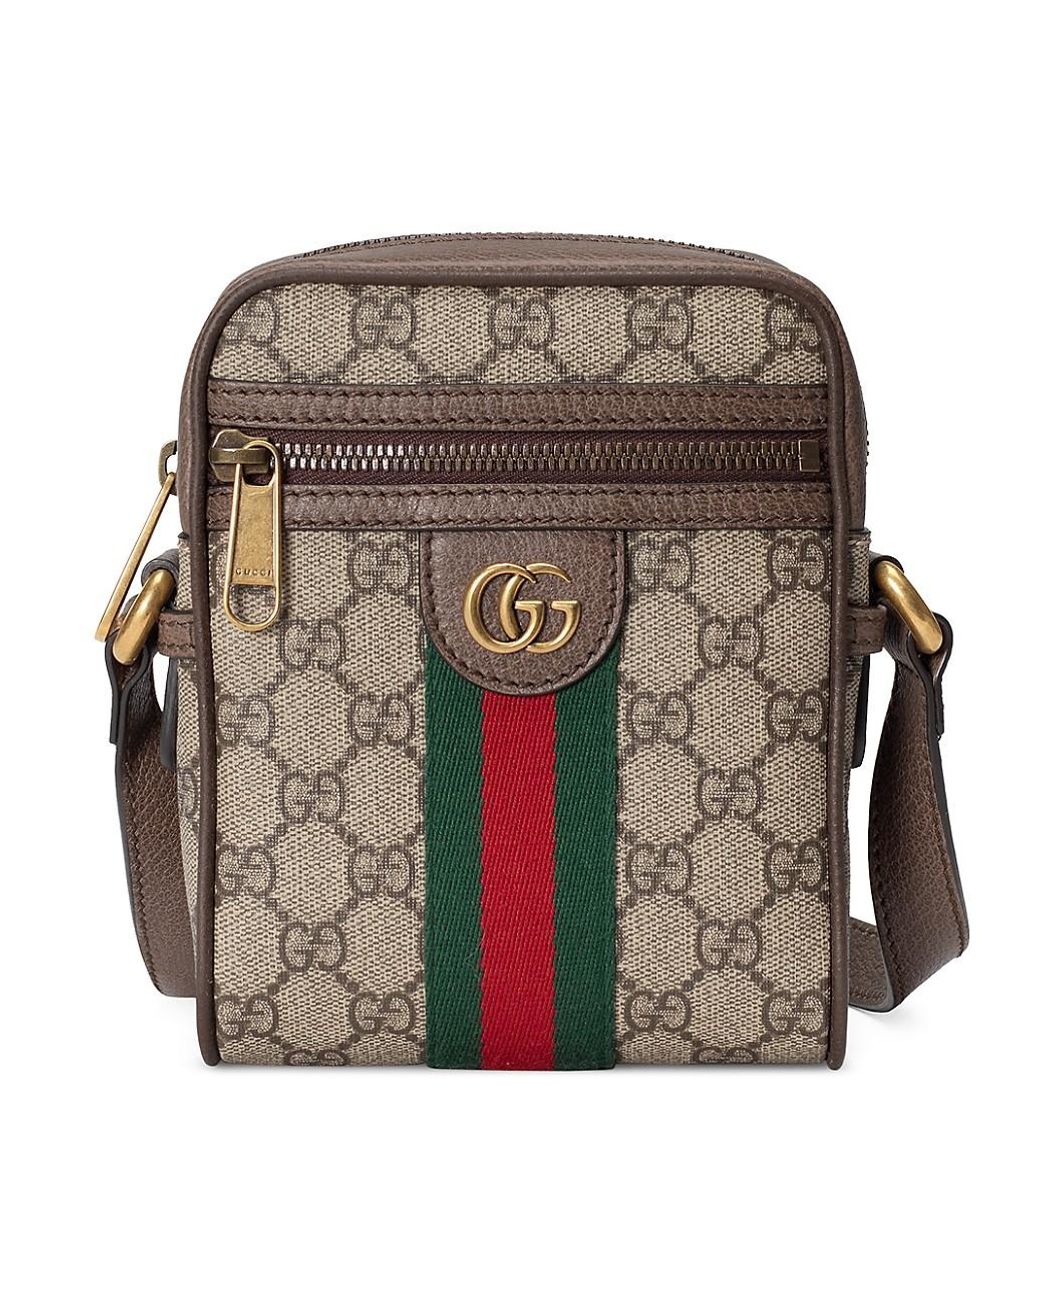 Gucci GG Supreme Canvas And Leather Cross-body Bag in Beige (Natural ...